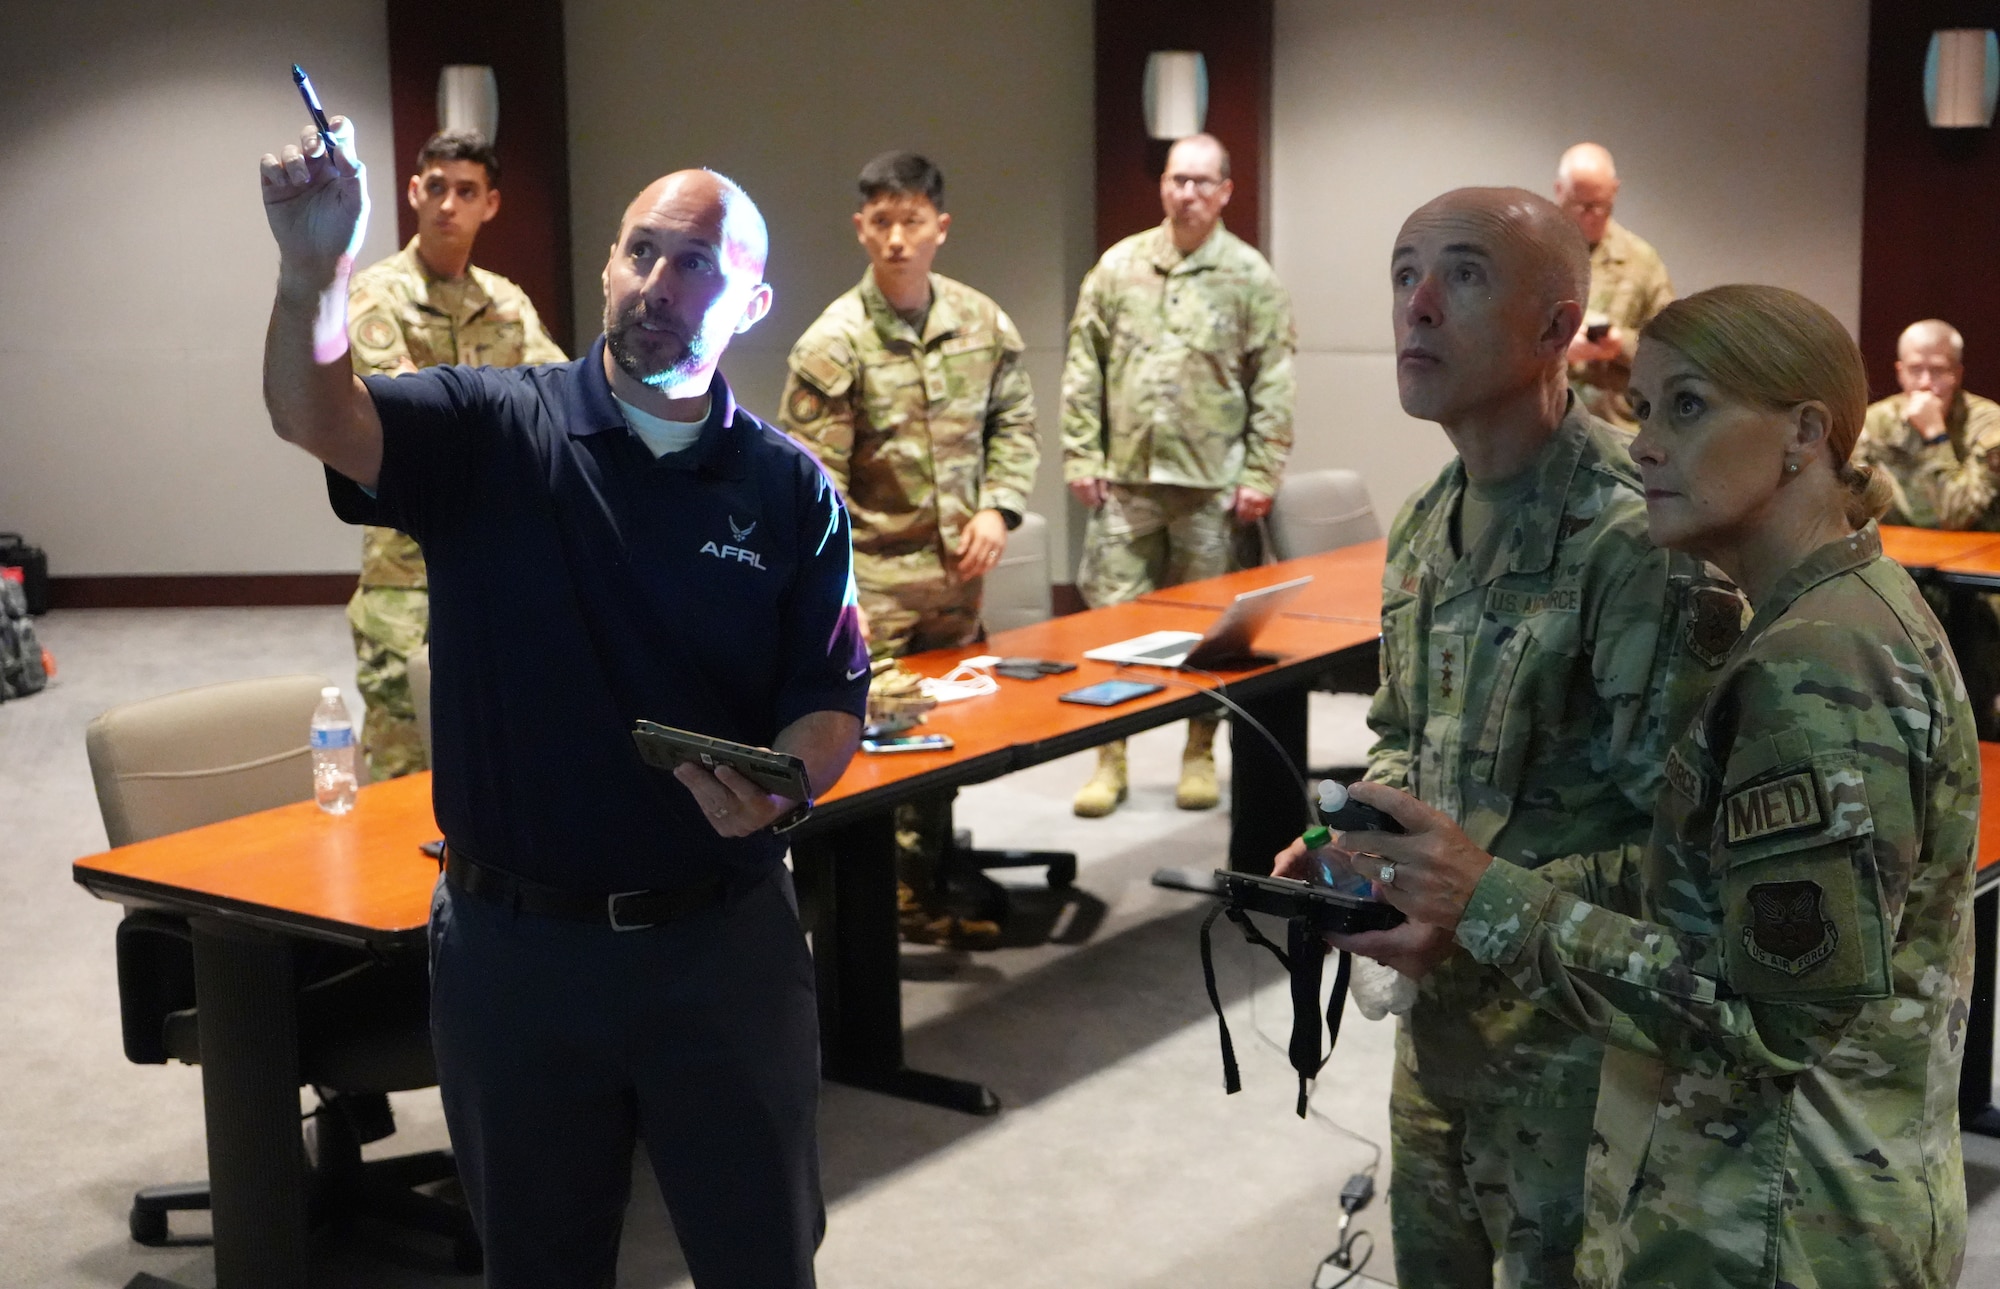 The 24th Special Operations Wing launched the Special Operations Center for Medical Integration and Development in 2021 as a cooperative effort between the U.S. Air Force and the University of Alabama-Birmingham to develop and provide advanced standardized training to special operations medics.